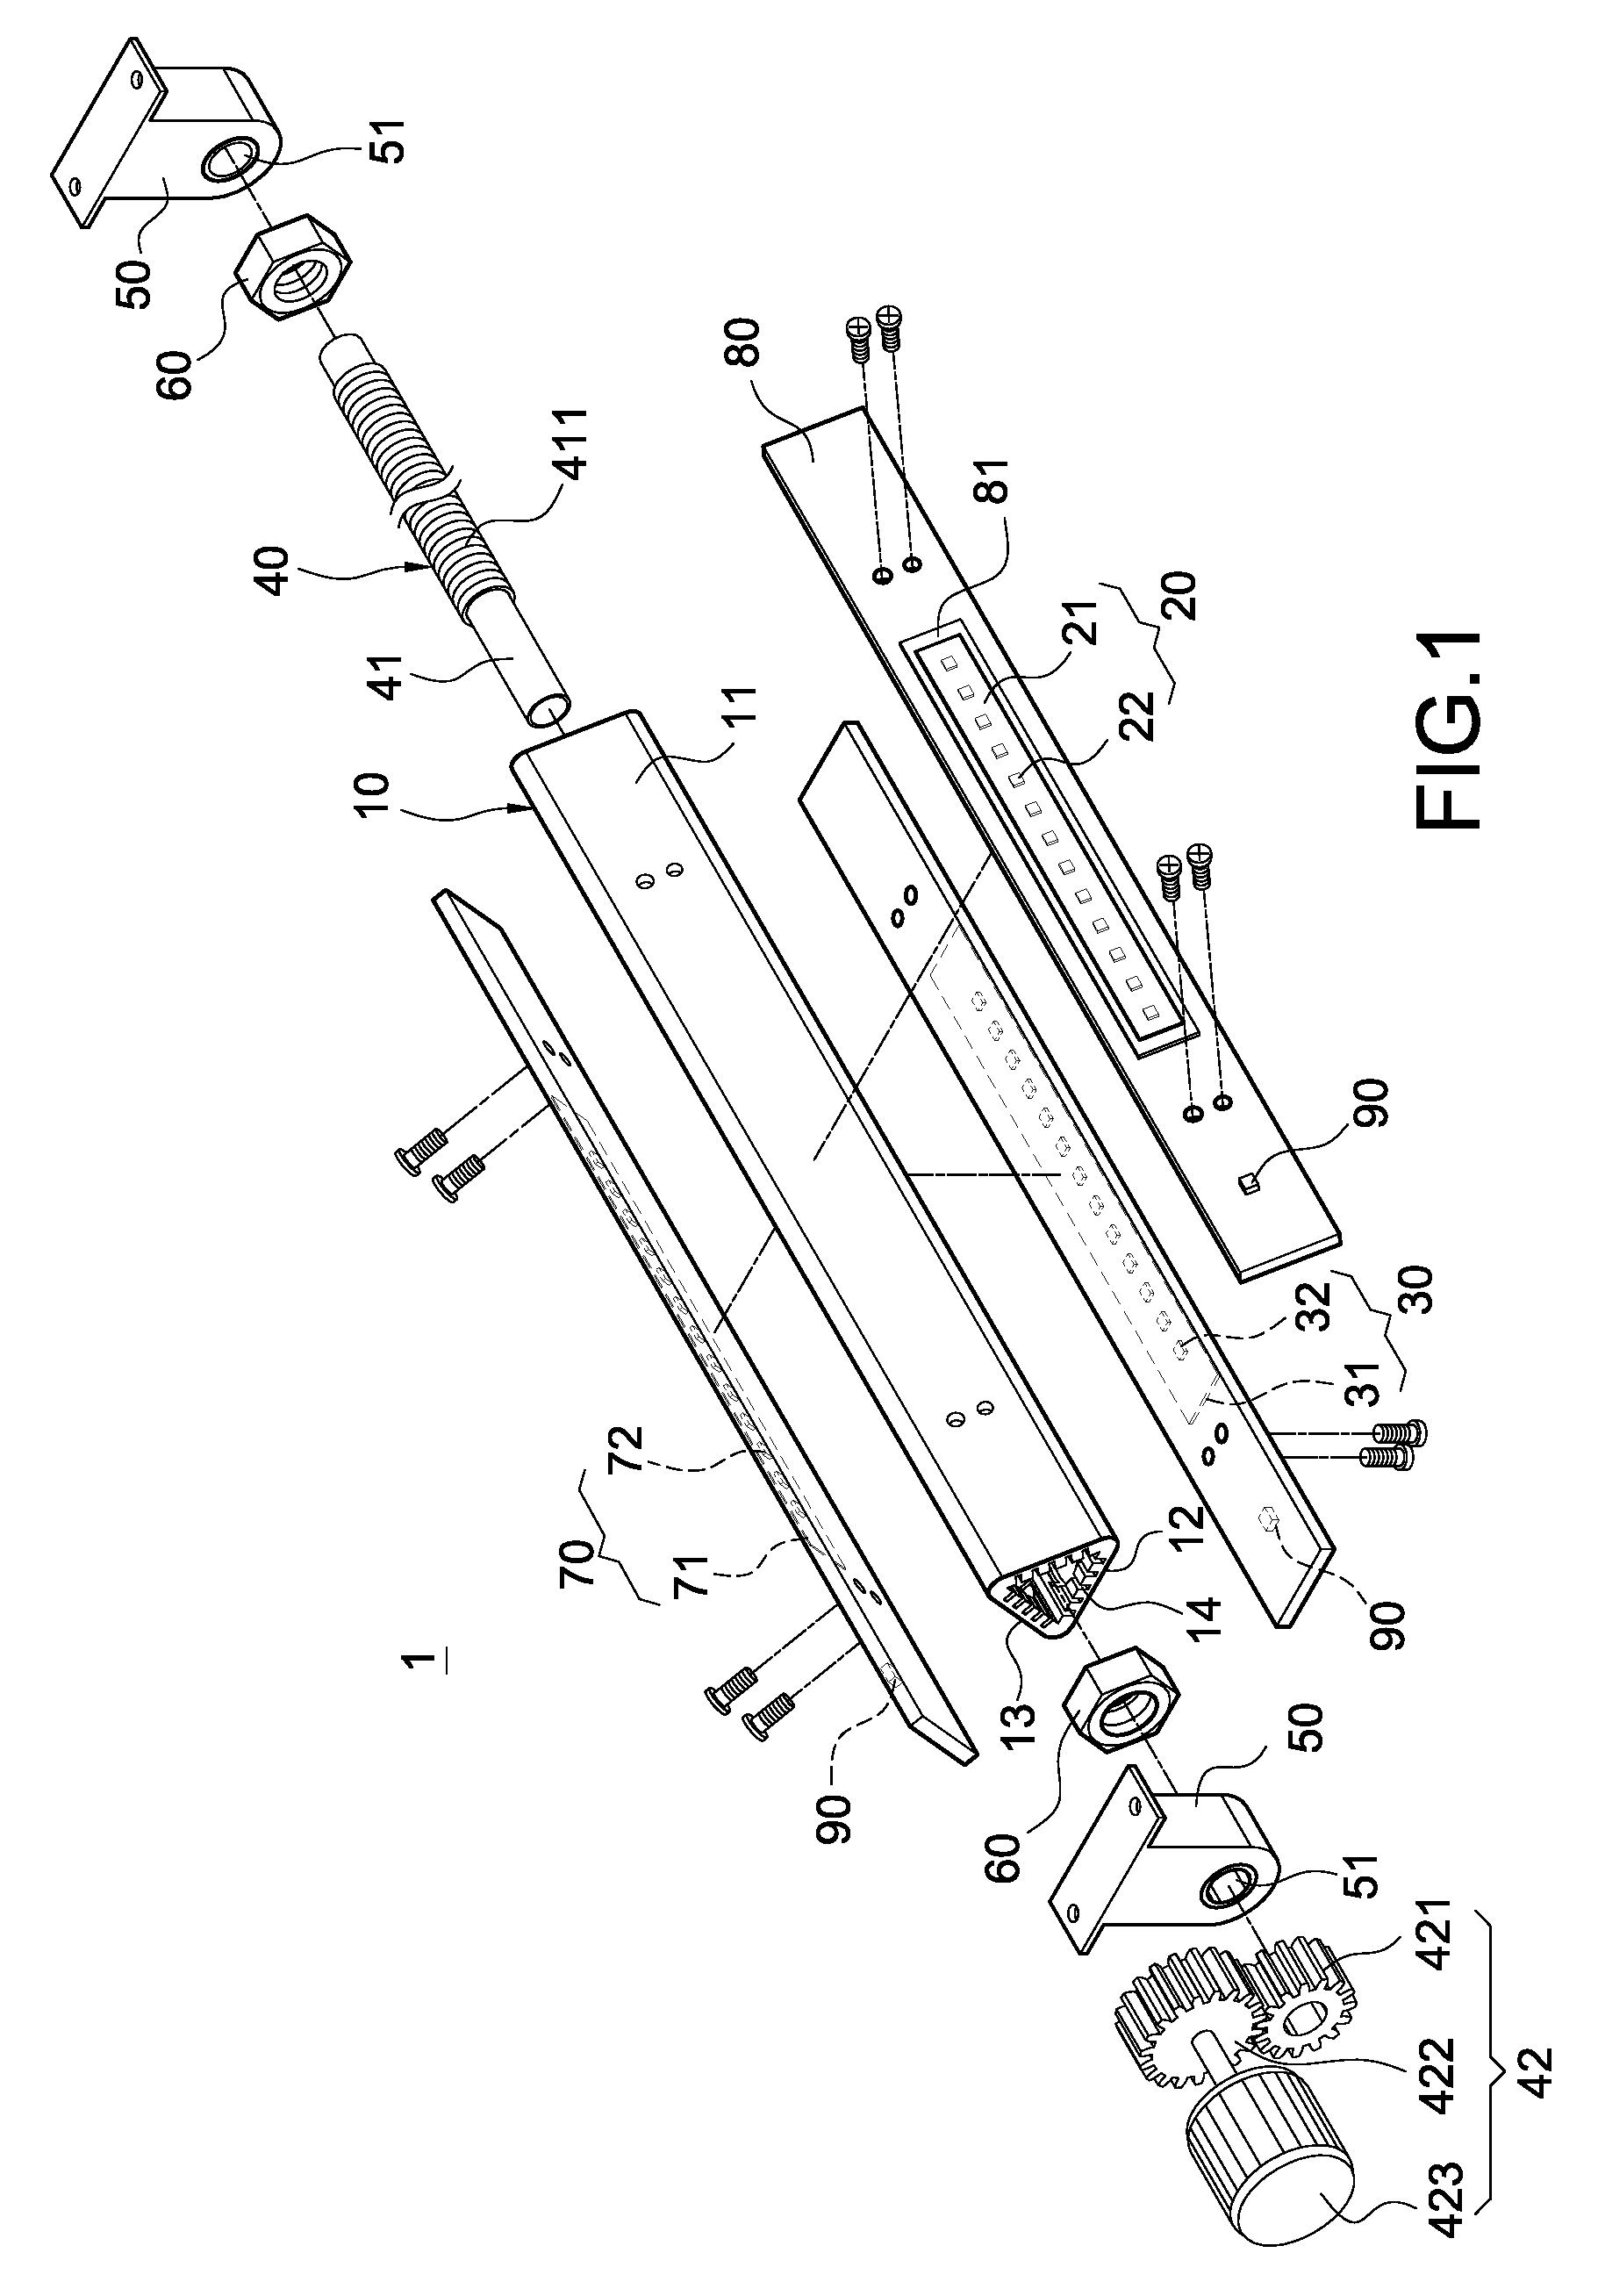 Light source device having different color temperature rotating lighting modules